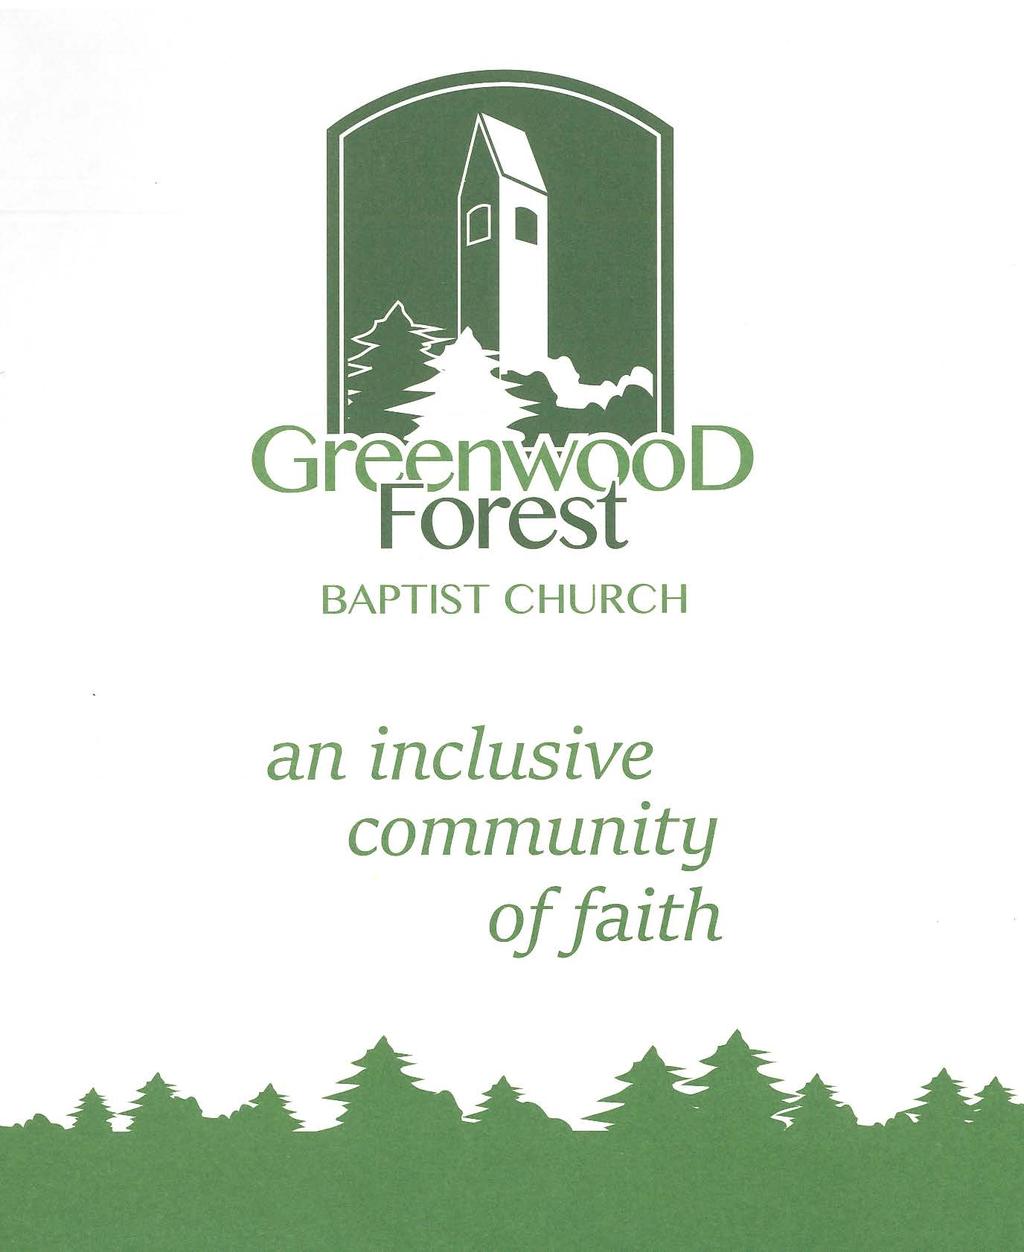 GREENWOOD FOREST BAPTIST CHURCH The Worship of God The Fifth Sunday of Lent April 7, 2019 Chiming of the Hour Processional Hymn 303 Welcome to Worship All Who Hunger, Gather Gladly Rev.